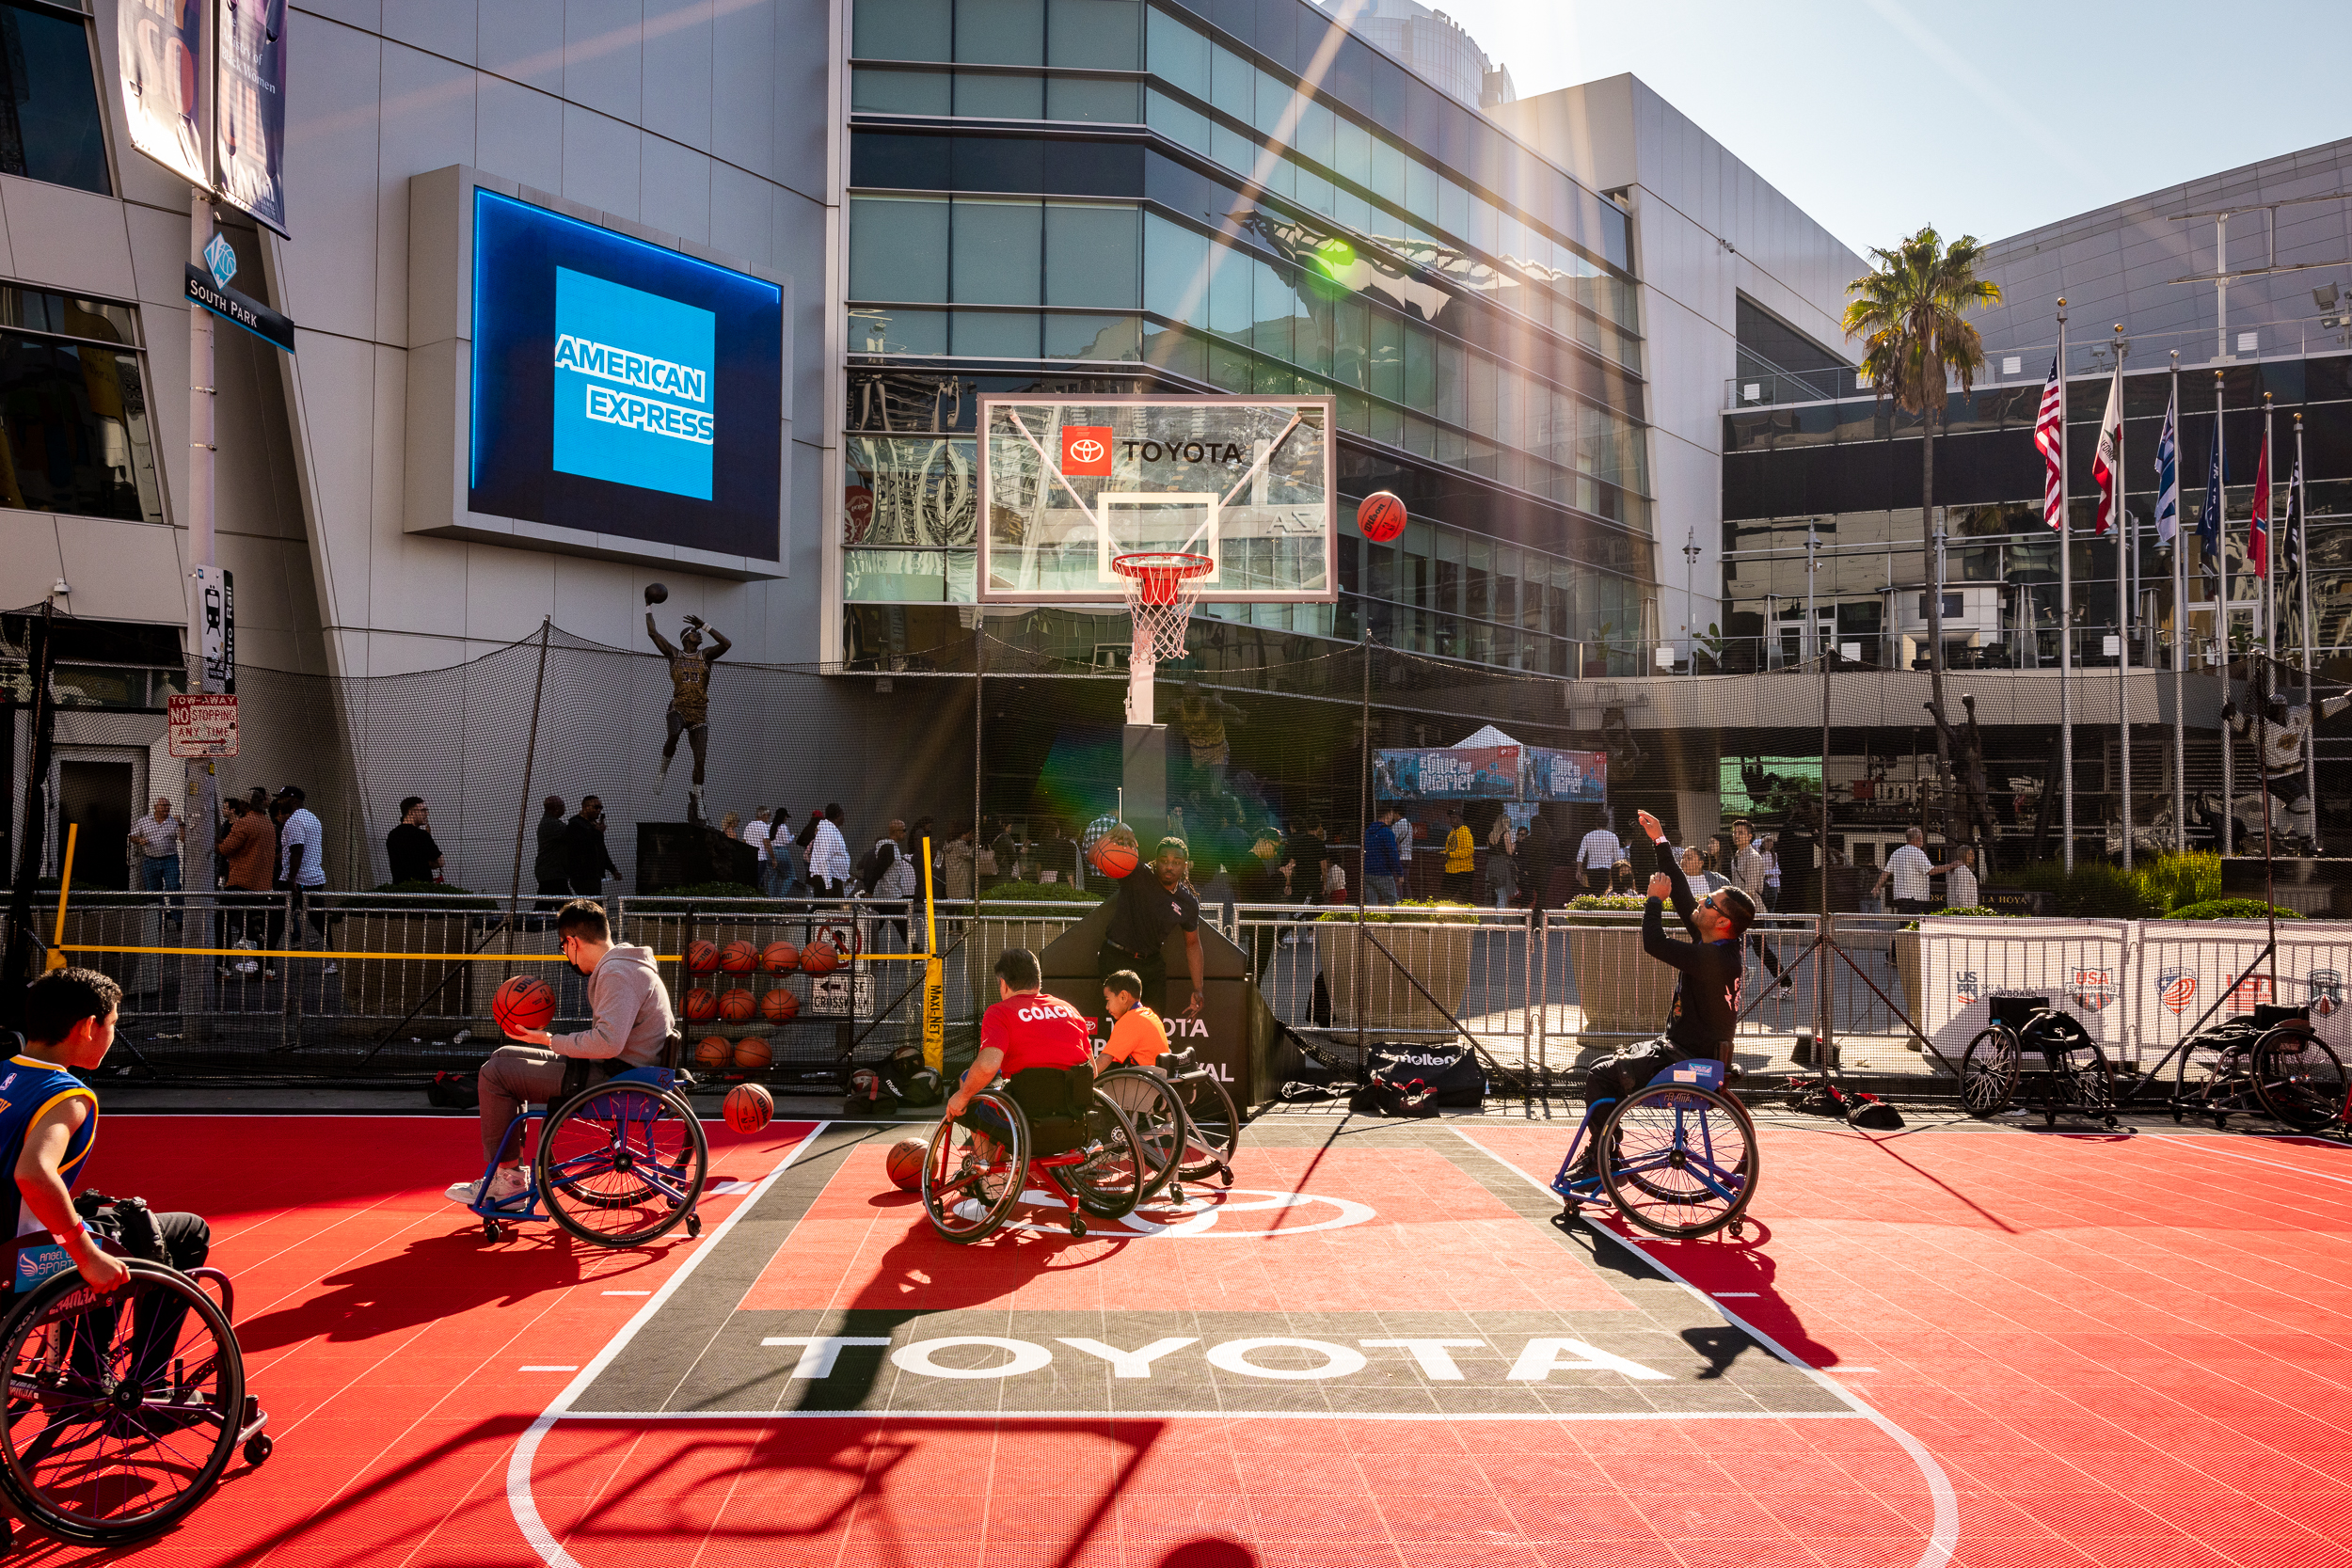 a wheelchair basketball game goes on, on a Toyota branded court